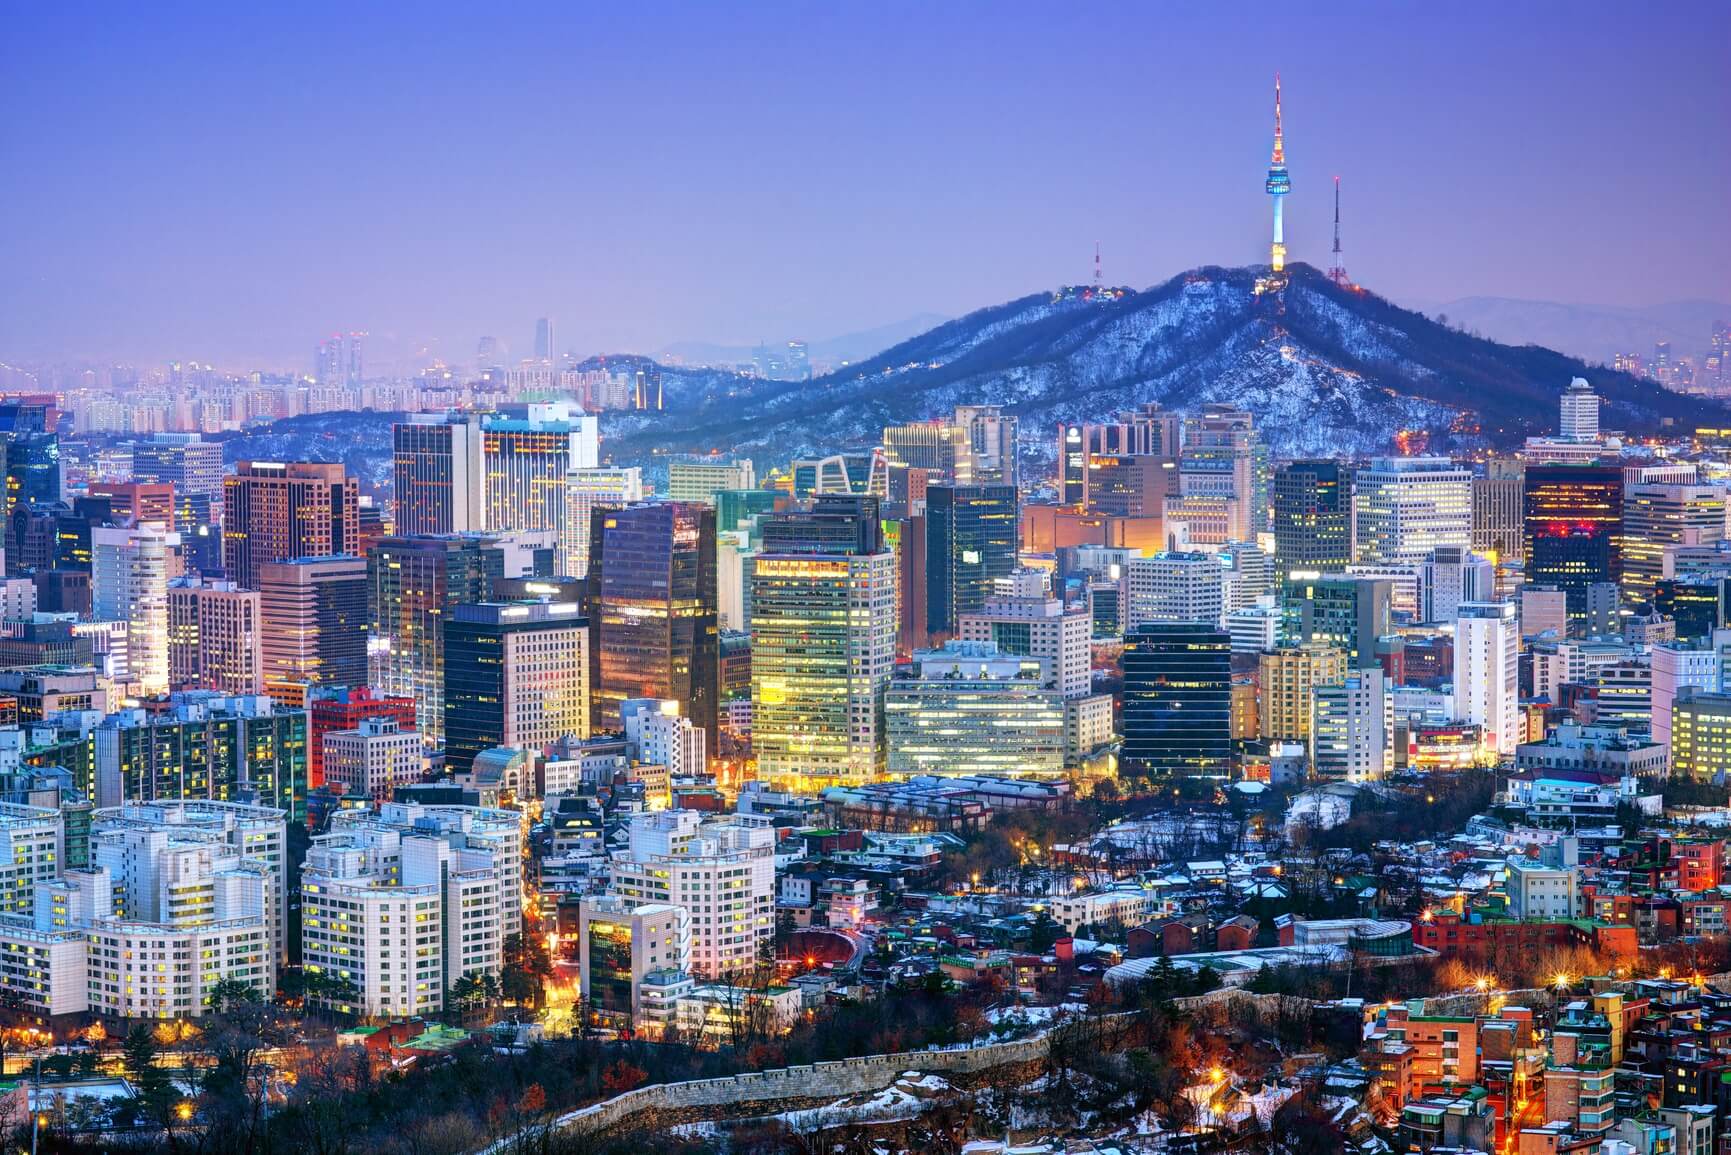 Flight deals from Portuguese cities to Seoul, South Korea | Secret Flying